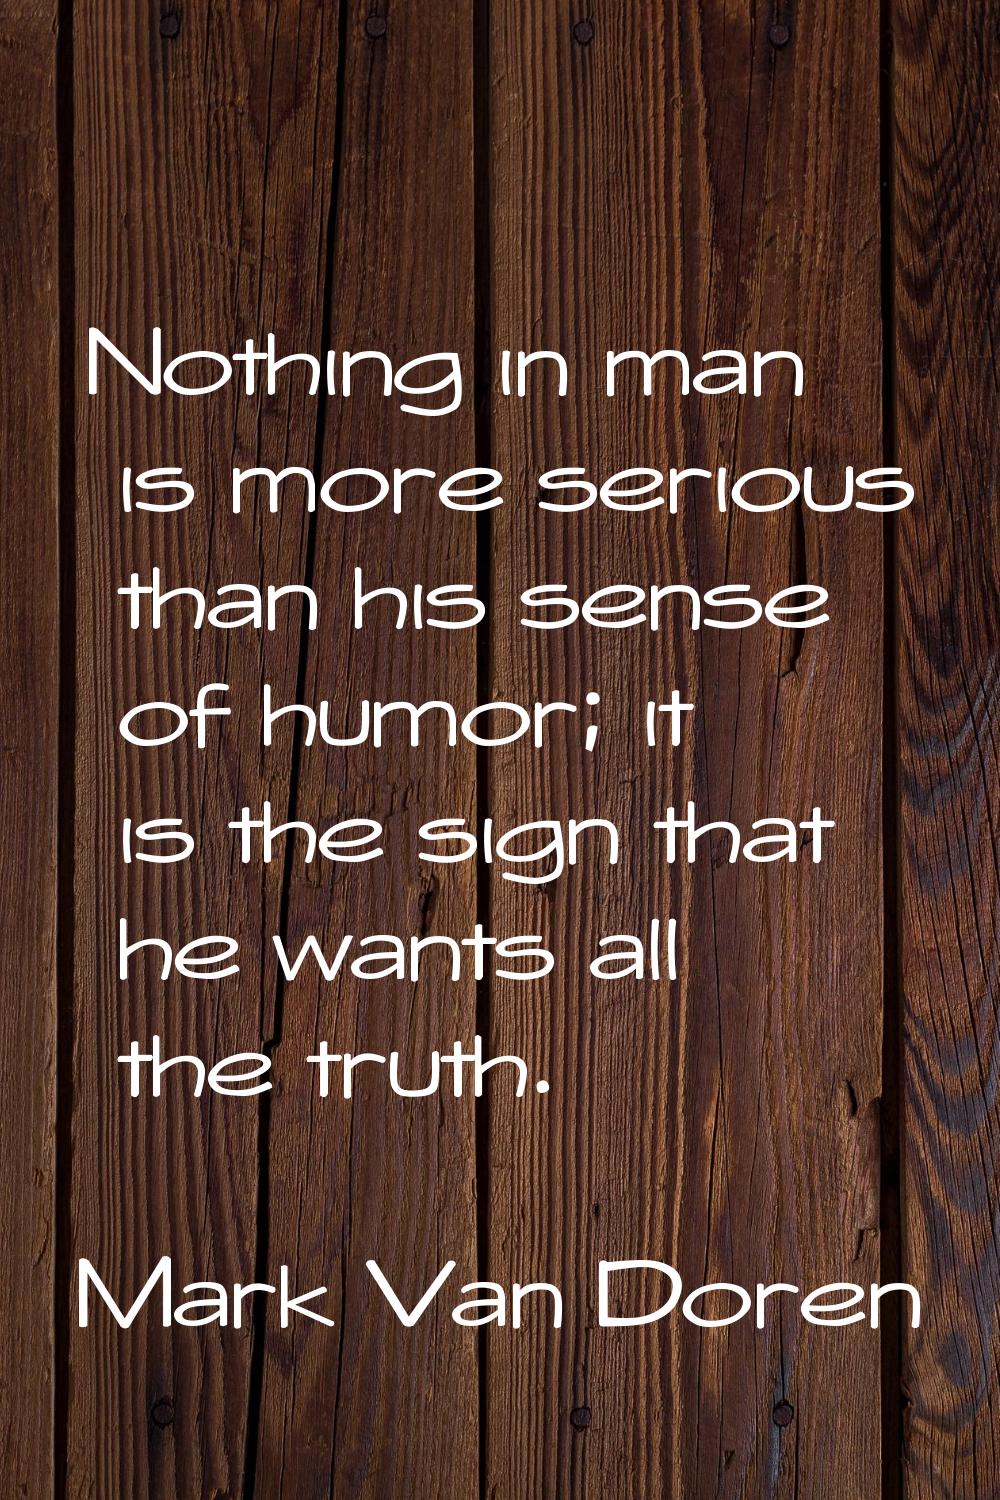 Nothing in man is more serious than his sense of humor; it is the sign that he wants all the truth.